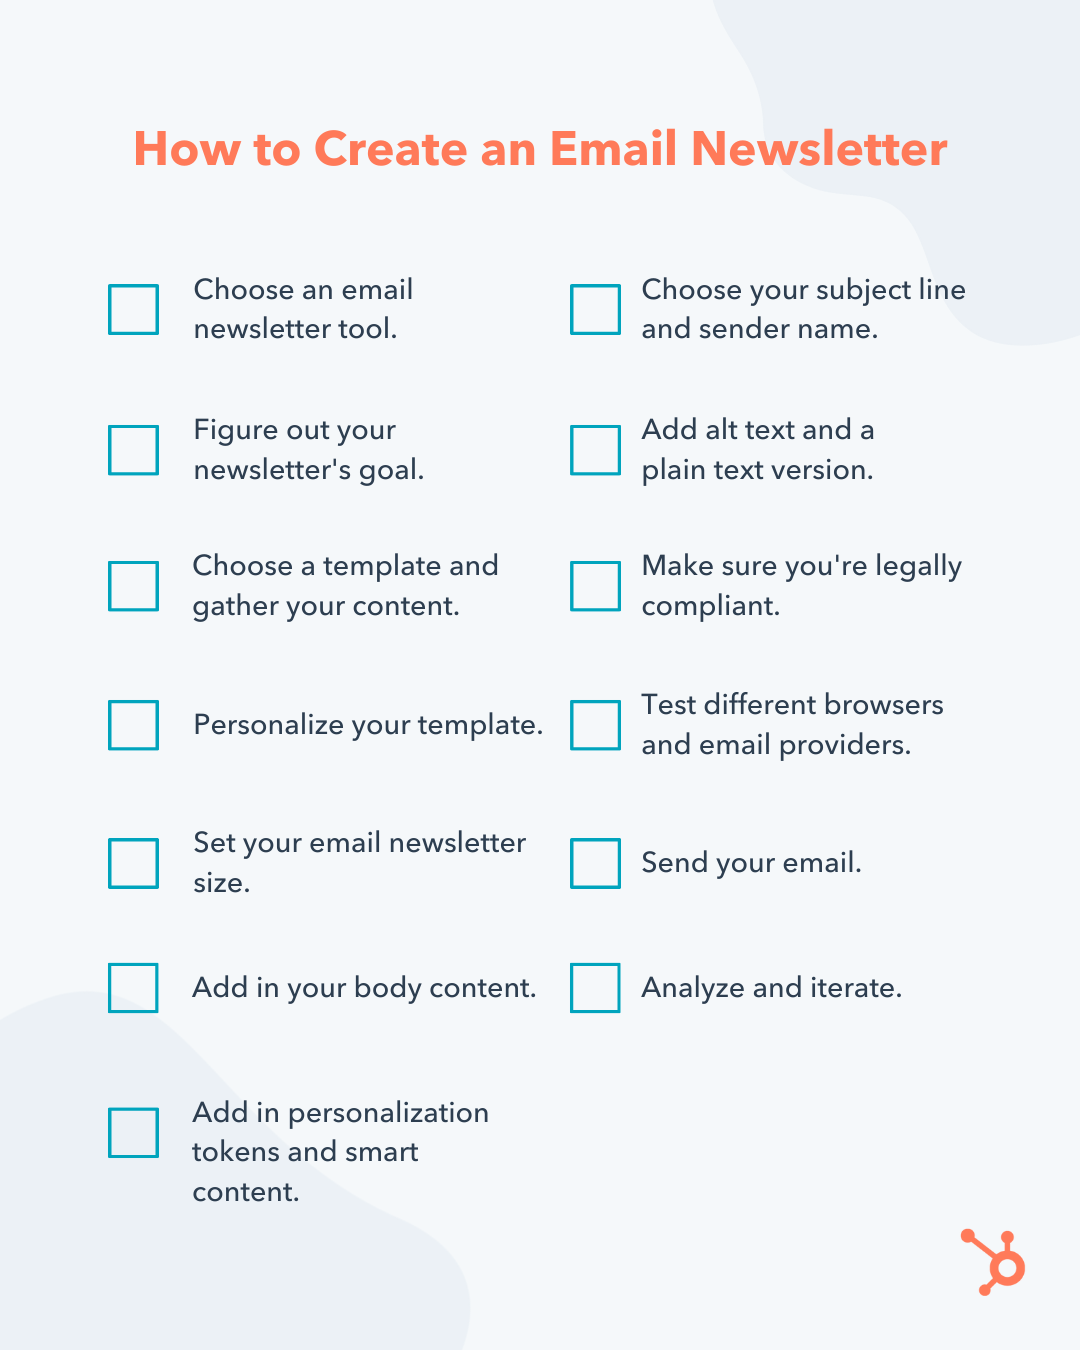 How to create an email newsletter: checklist